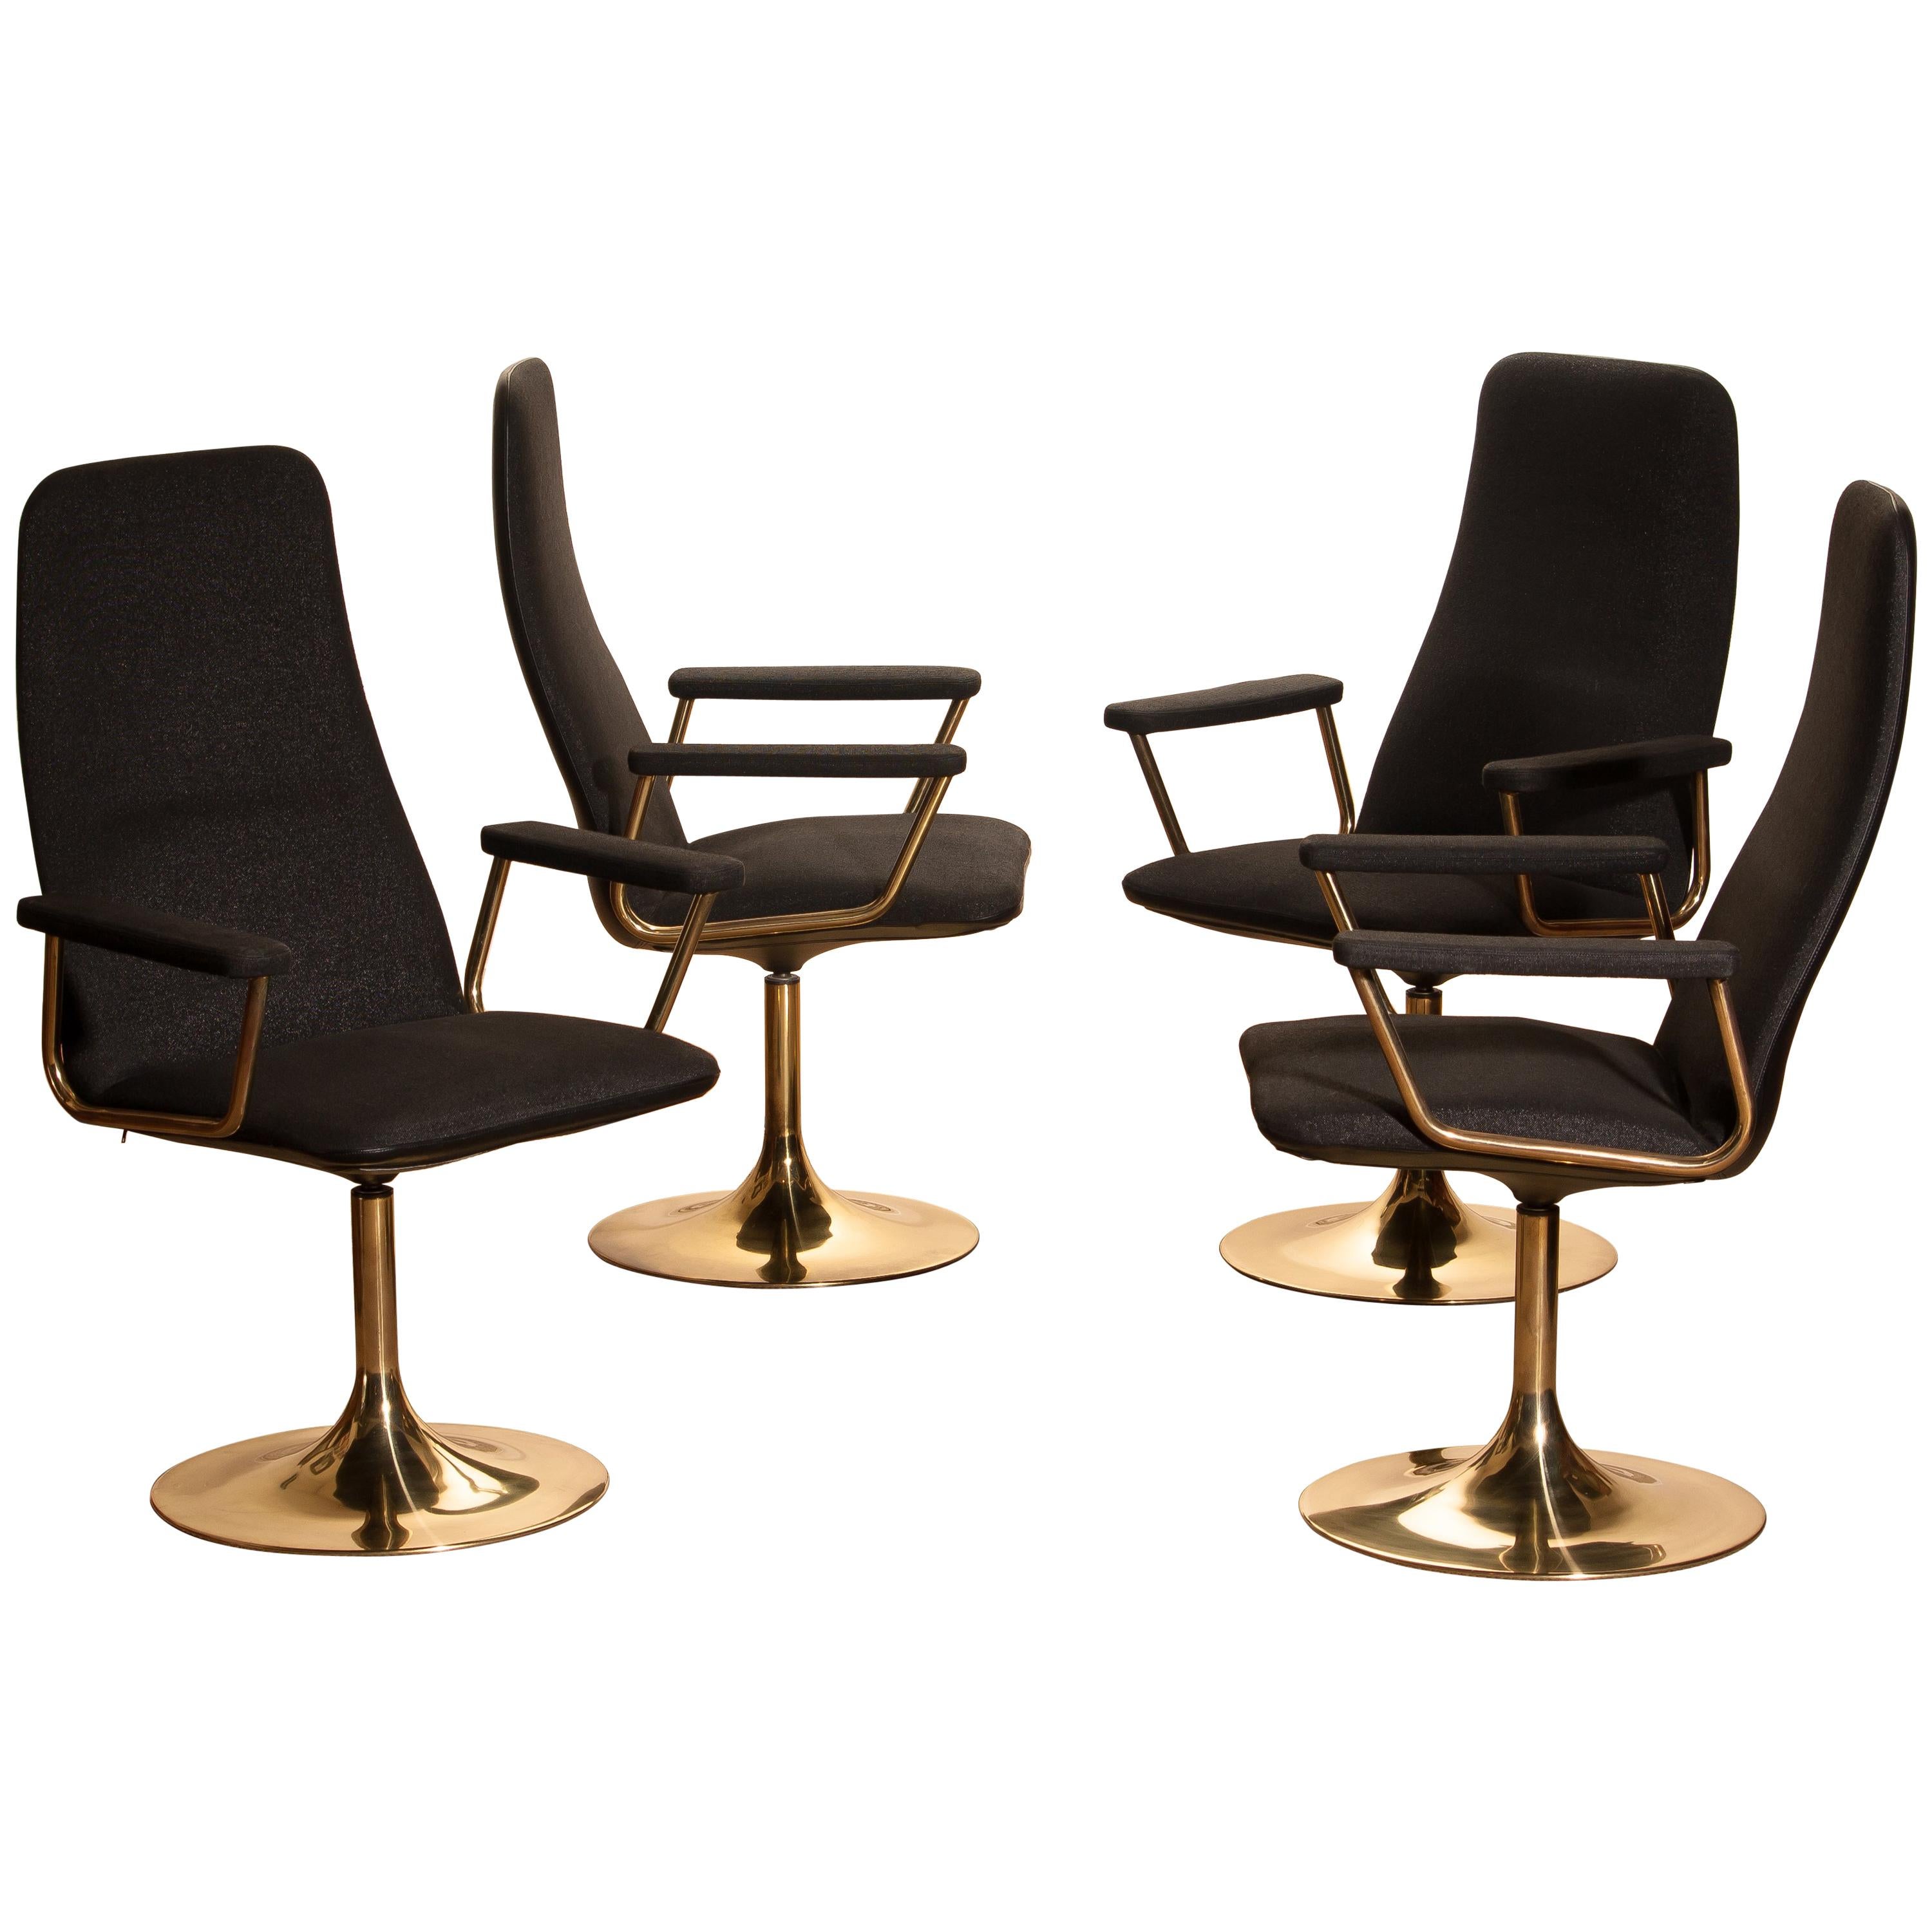 Set of four early production golden swivel chairs with armrests by Börje Johanson Design for Markaryd, Sweden. 
Upholstered with black fabric and black faux leather back on golden steel bases.
The chairs are in a good condition and from the